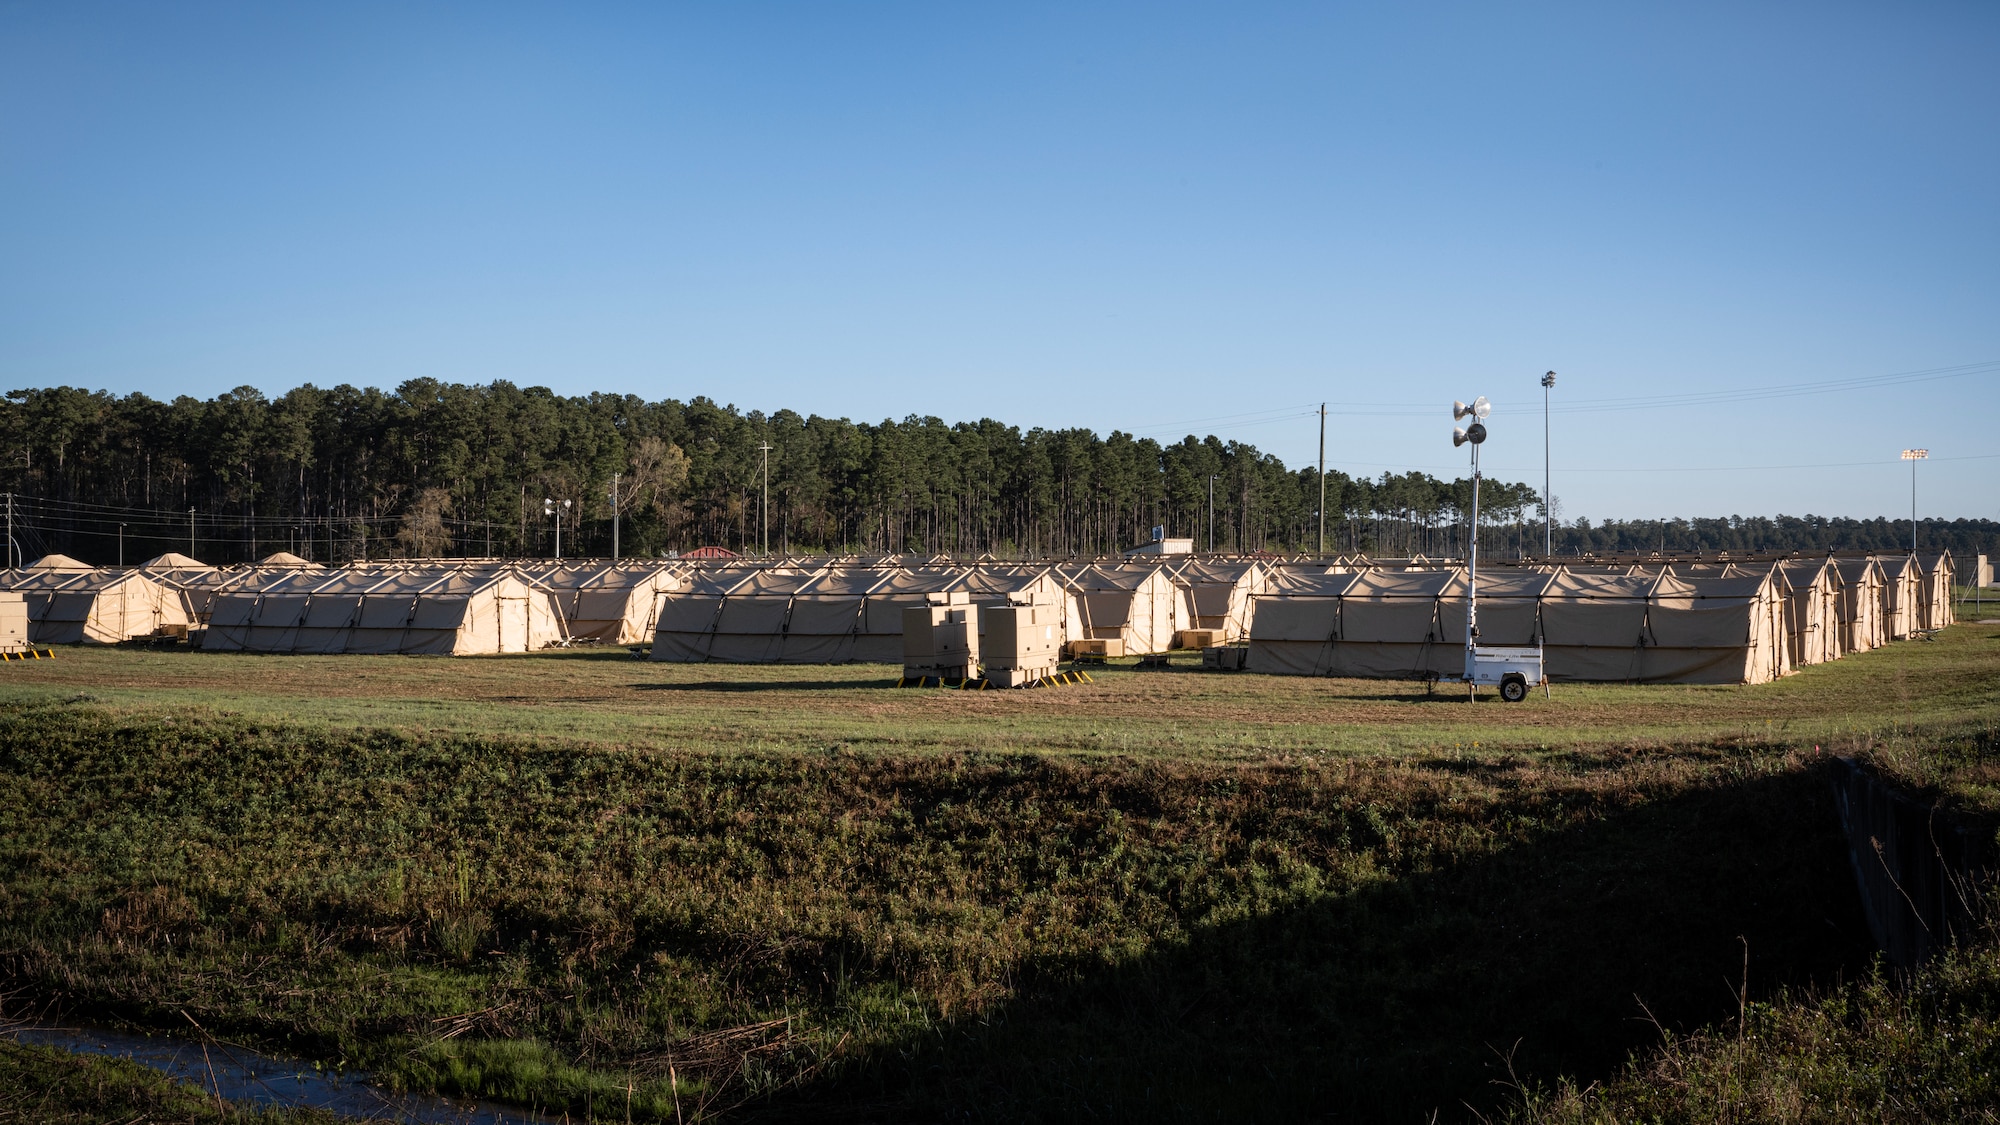 Twenty tents, referred to as "tent city", is where multiple Airmen from multiple units slept during AGILE FLAG 23-1 at Hunter Army Airfield, Georgia, March 5, 2023.